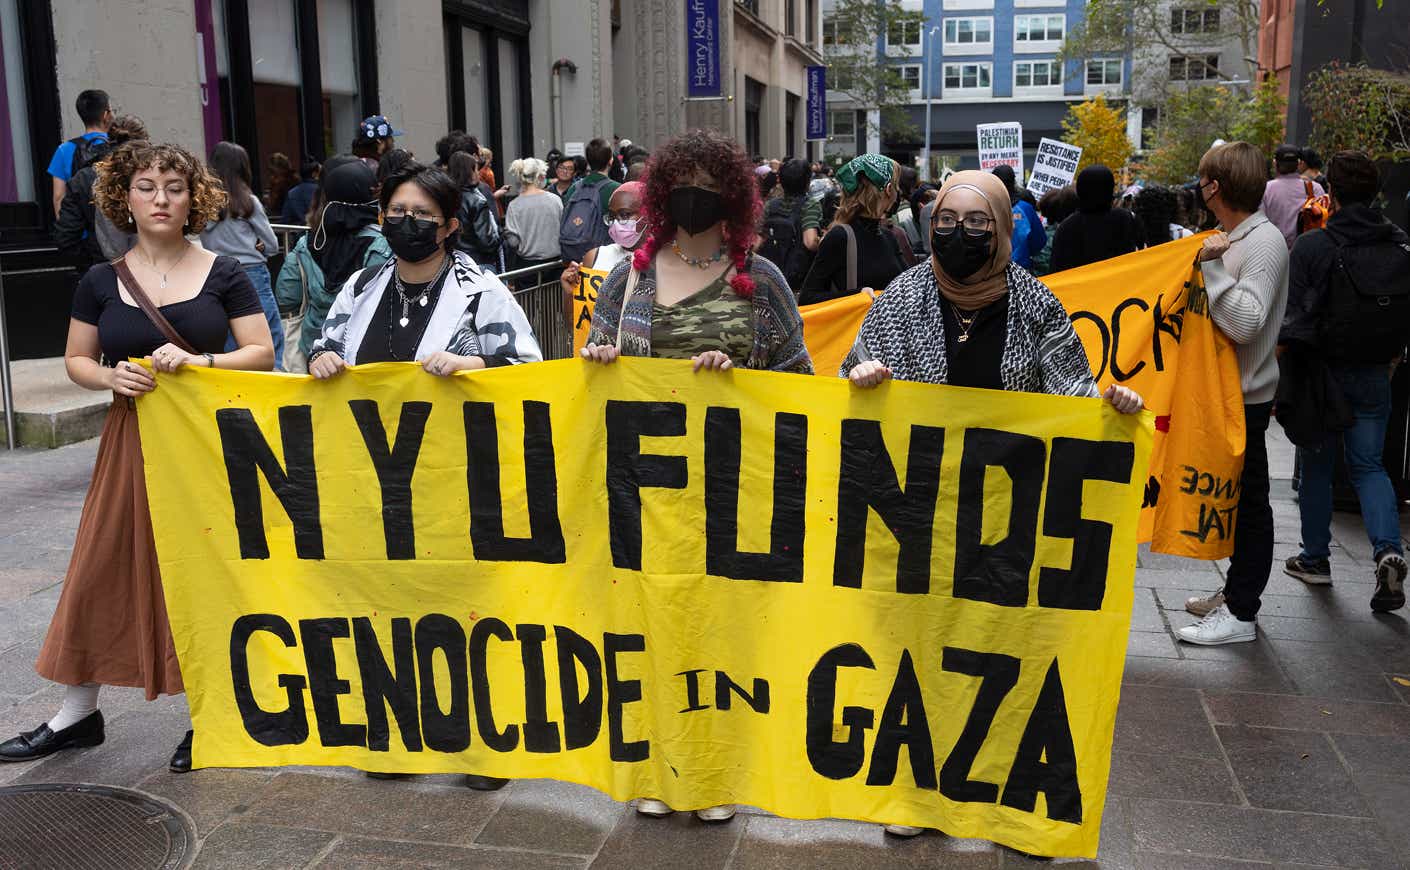 protestors at NYU hold a "NYU finds genocide in Gaza" sign